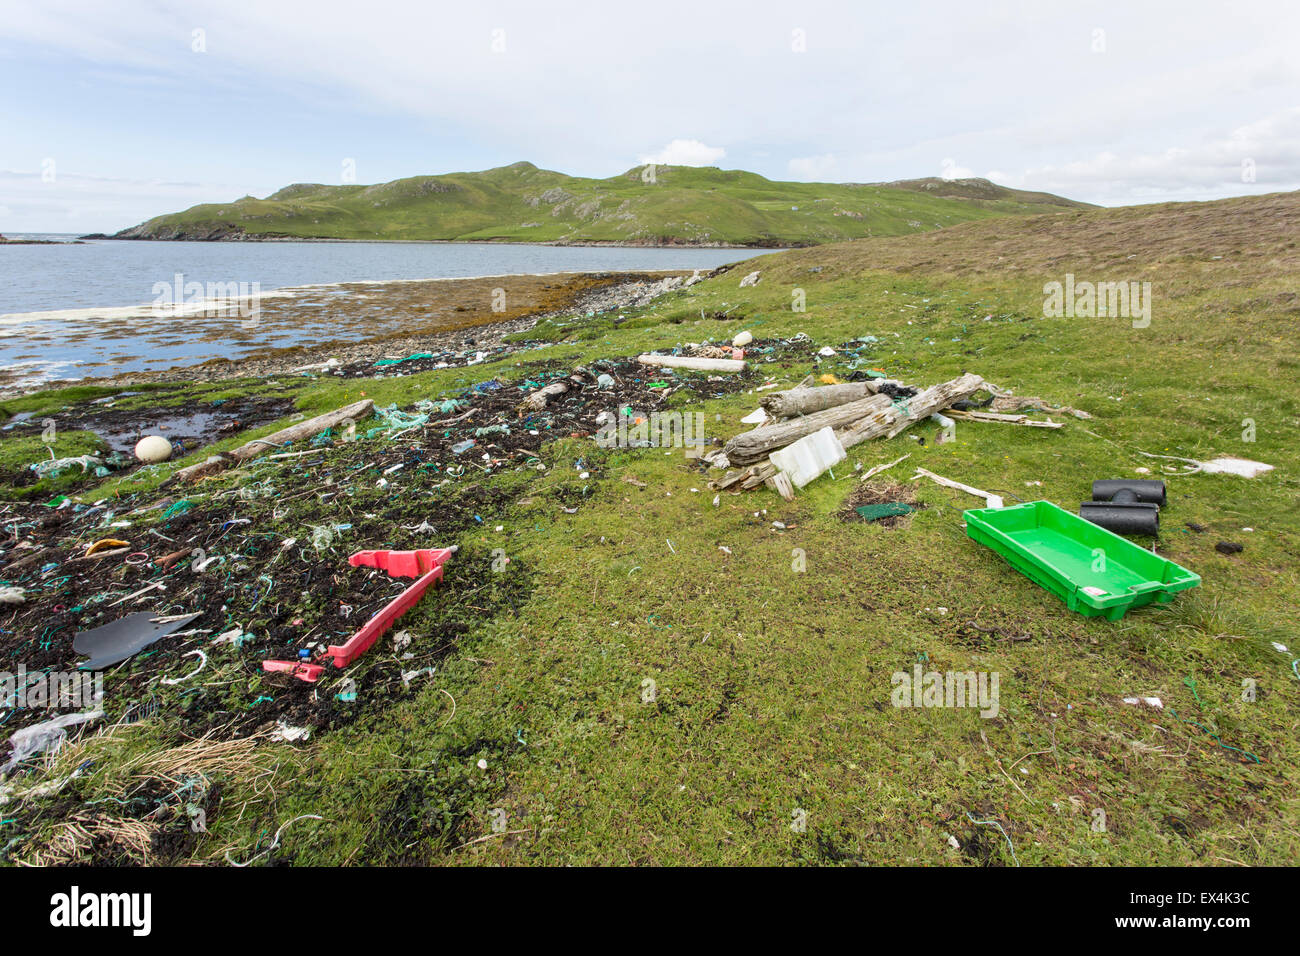 Rubbish (flotsam) washed ashore from the Atlantic Ocean, including many plastic objects, on Mainland, Shetlands Stock Photo